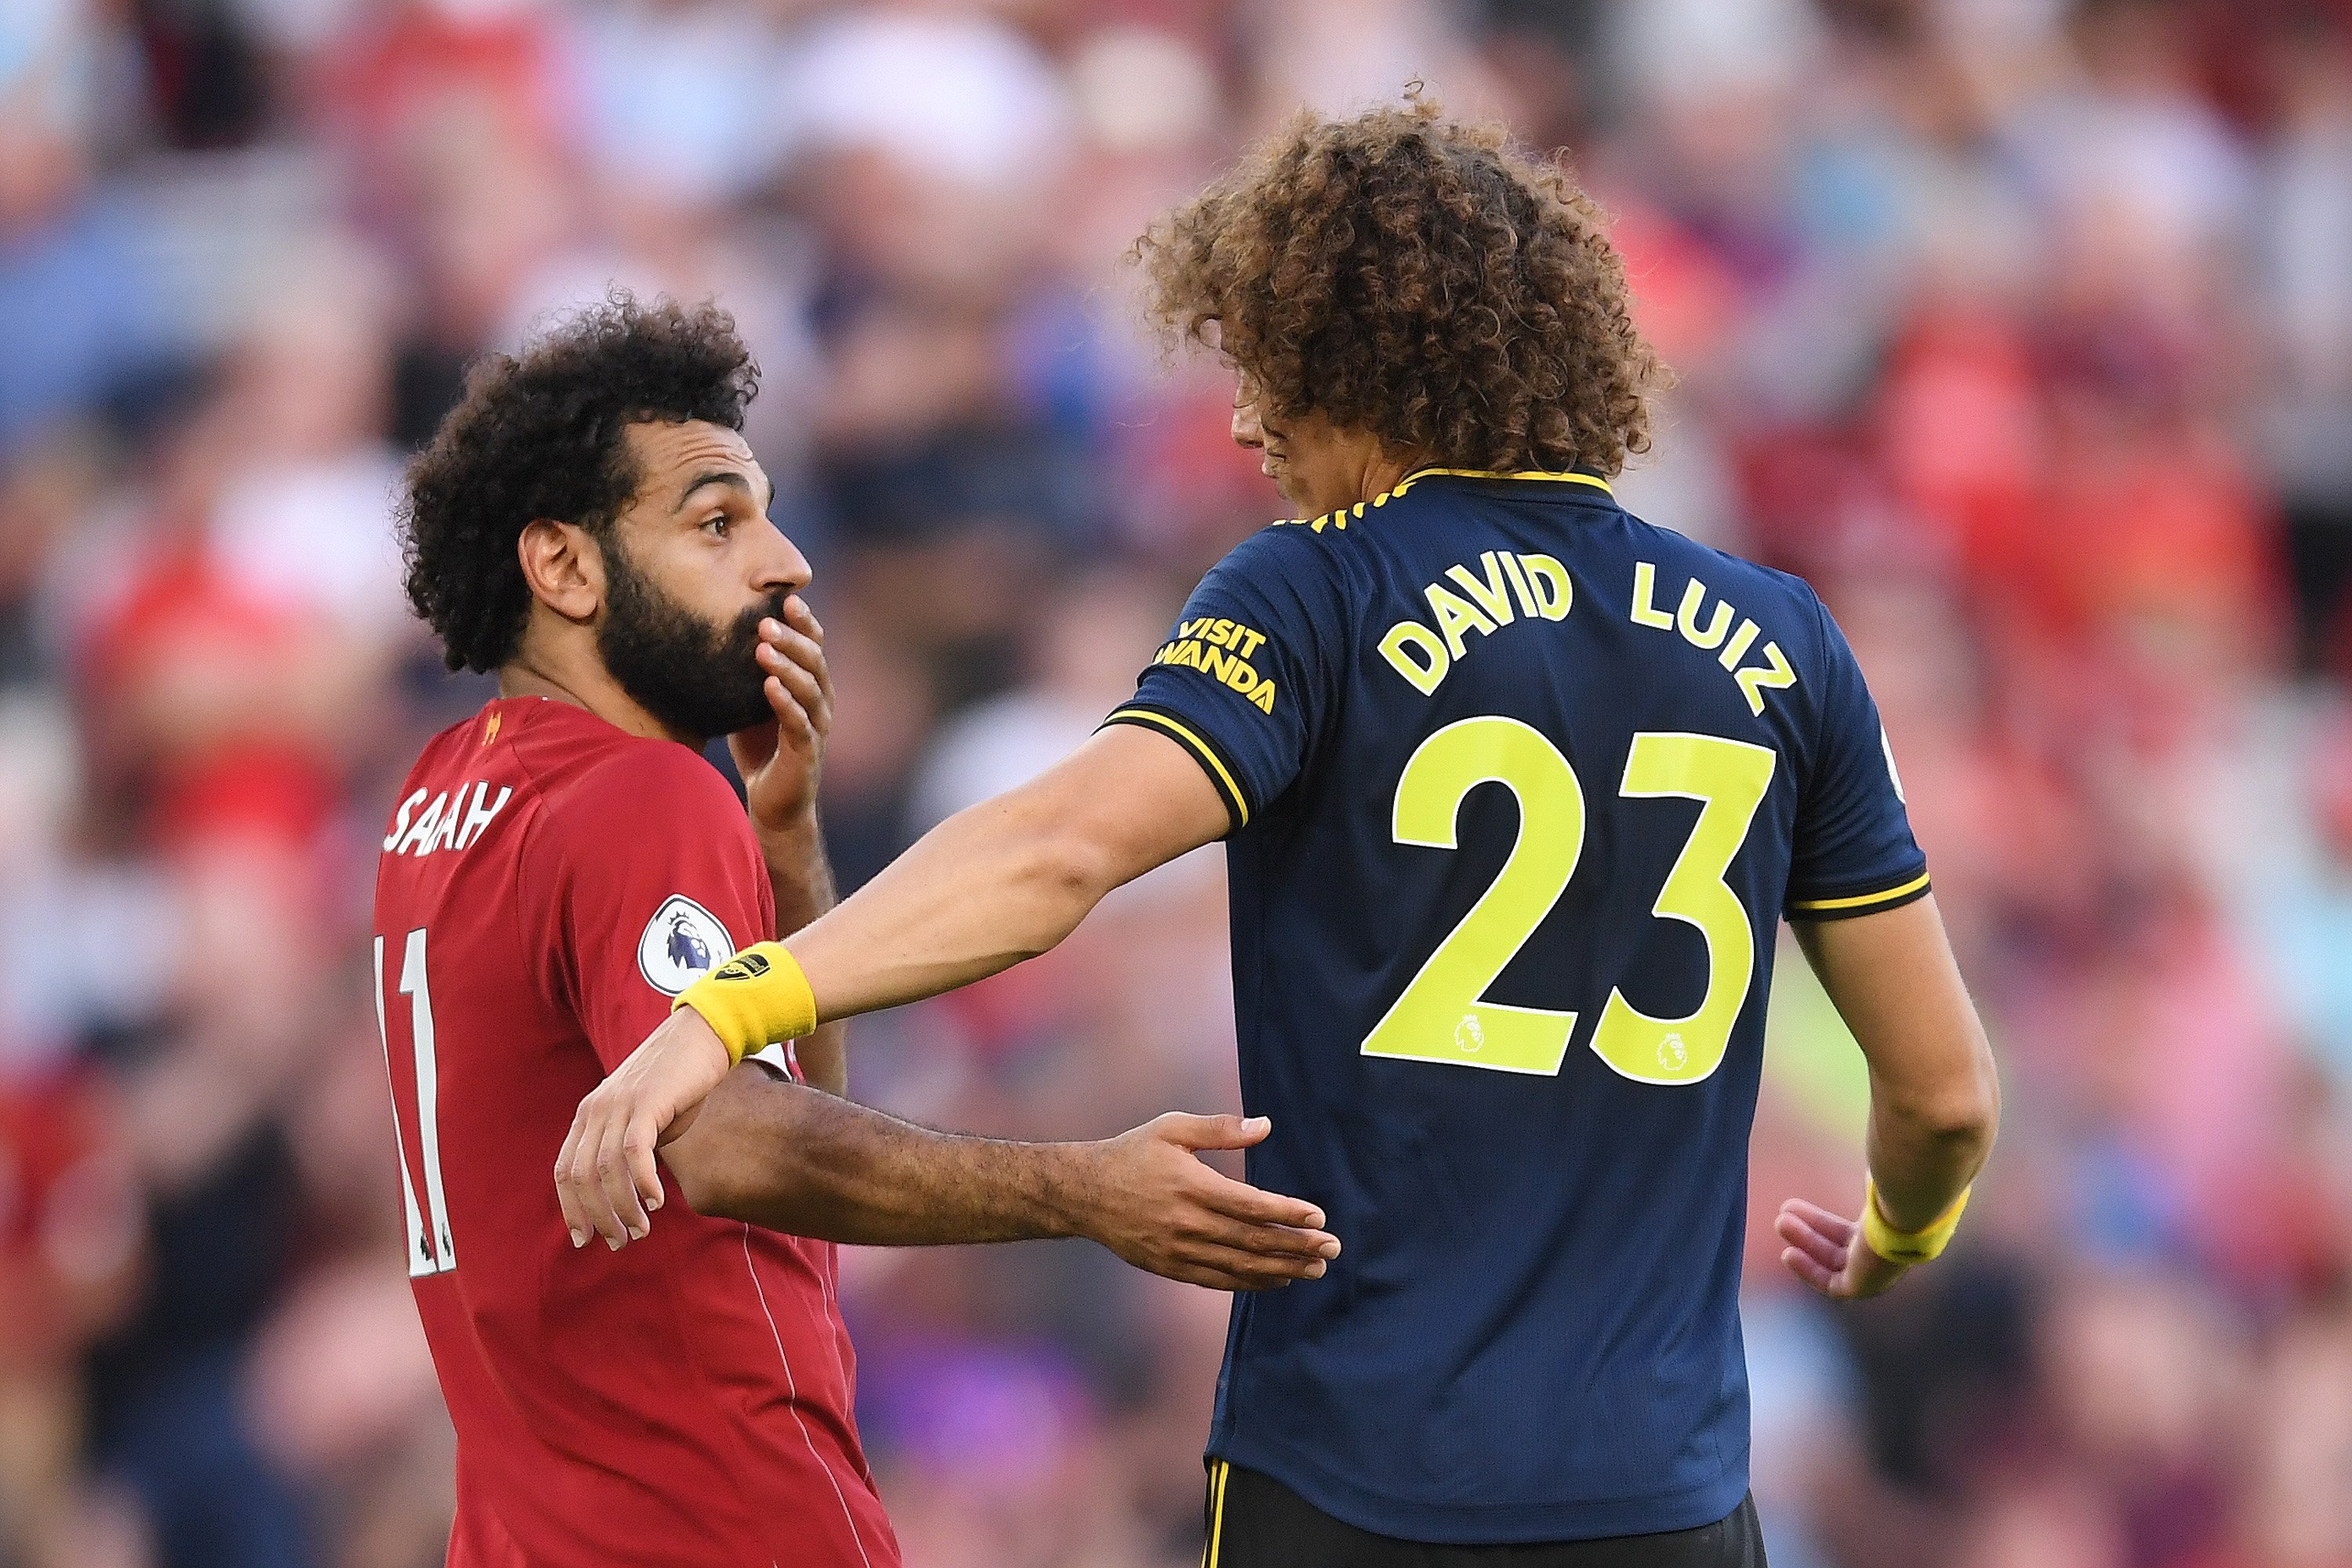 David Luiz reveals what Liverpool’s Mohamed Salah told him after penalty decision